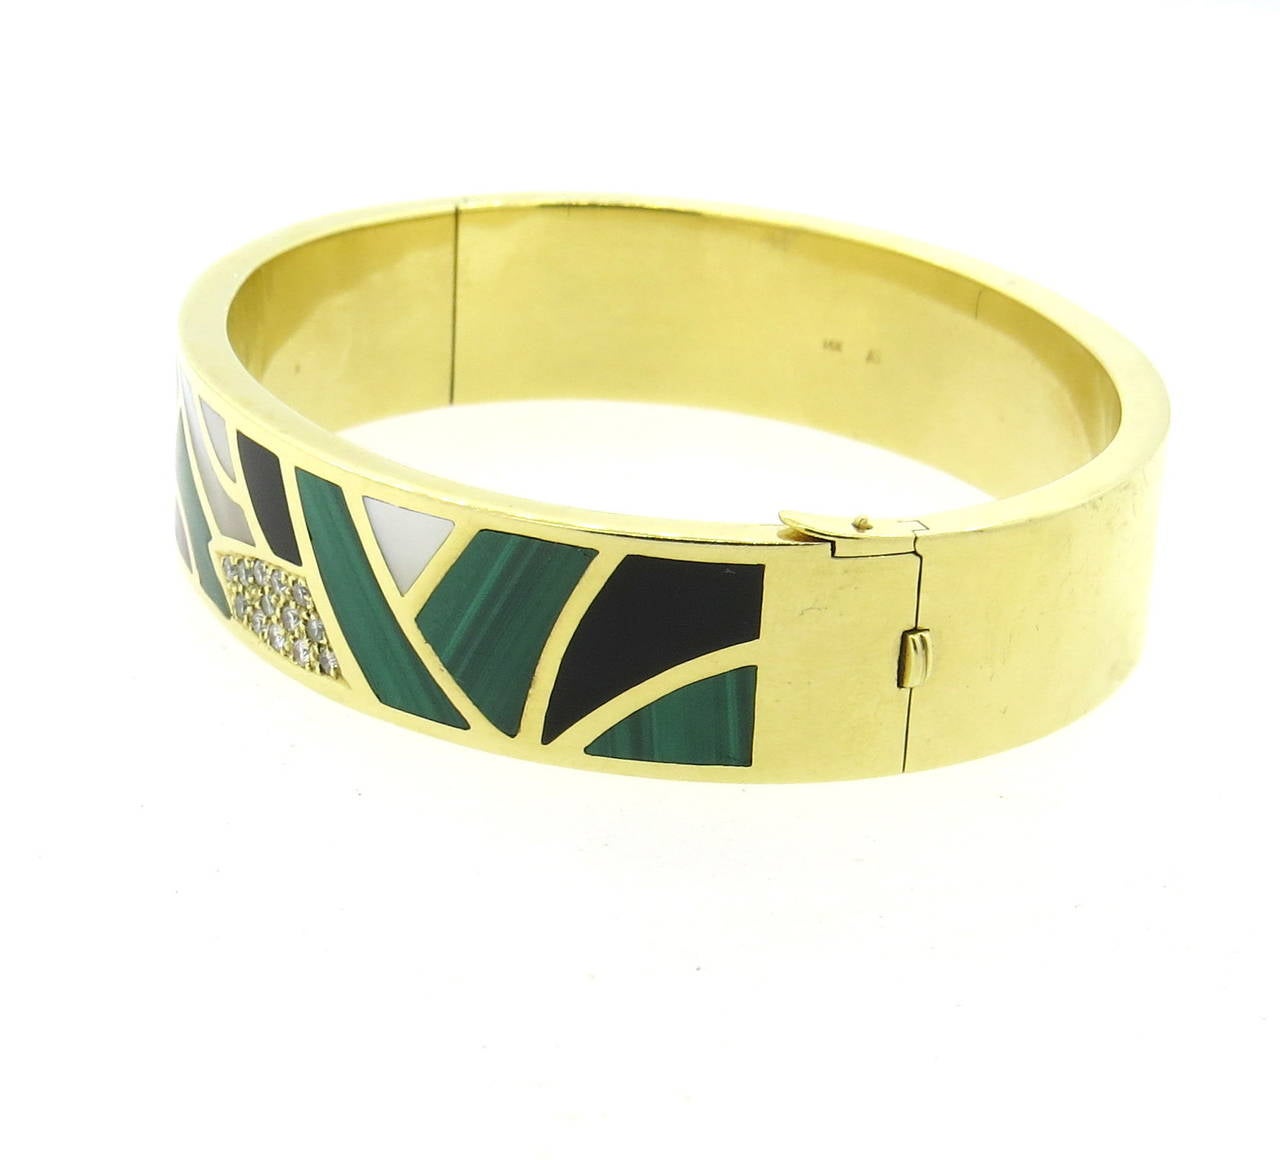 A 14k yellow gold bracelet adorned with mother of pearl, onyx, malachite, purple suglite and approximately 0.13ctw of G/VS diamonds.  Crafted by Asch Grossbardt, the bracelet comfortably fits up to a 7.25